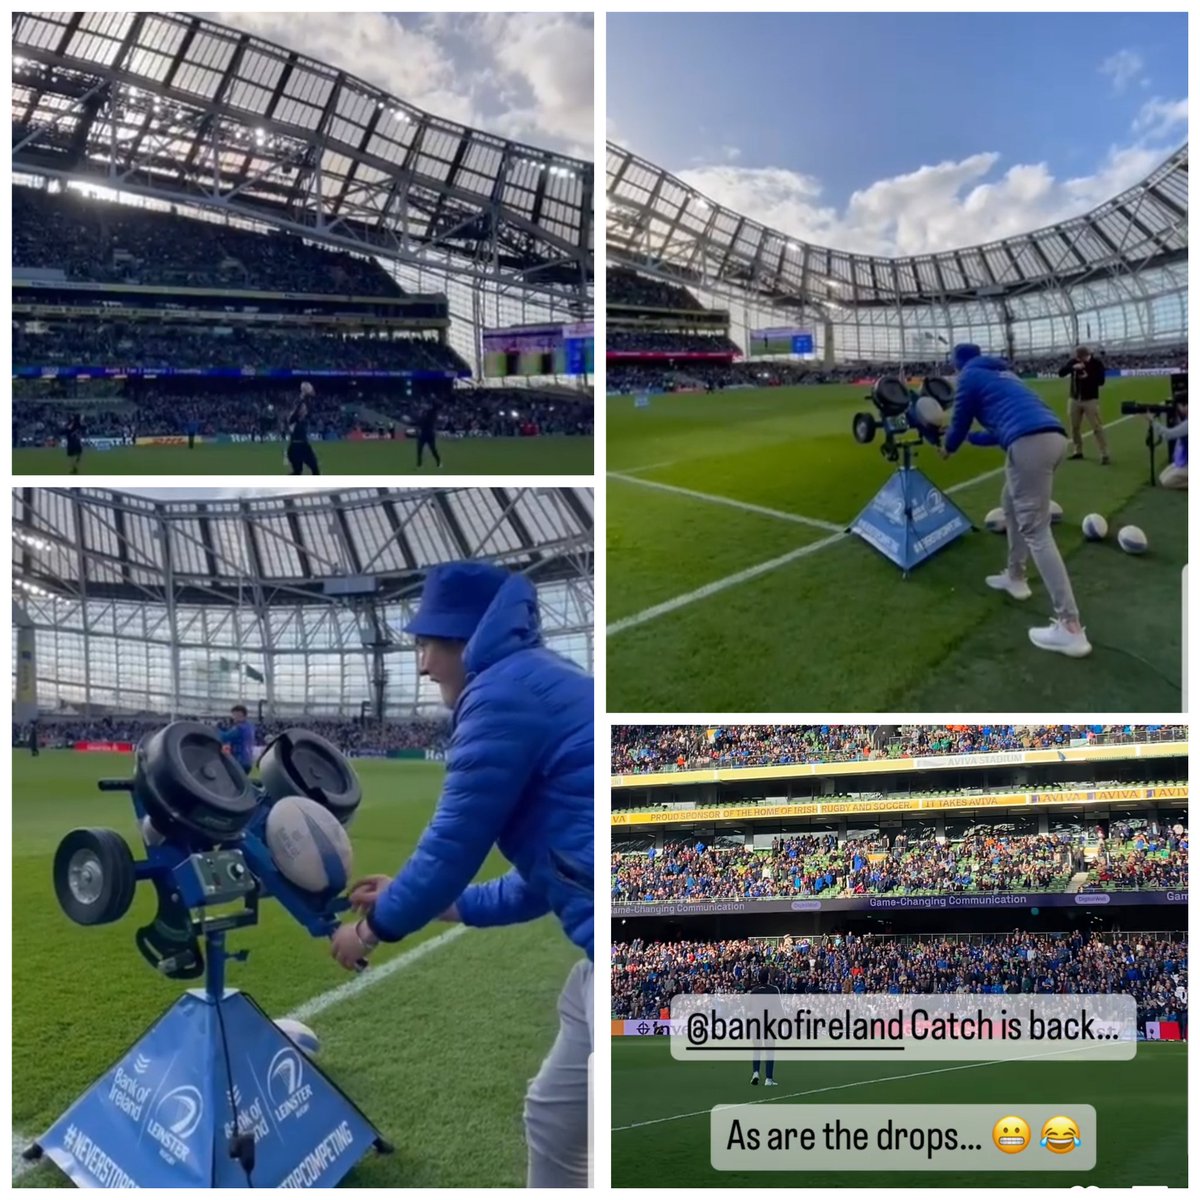 We're back @AVIVAStadium with Bank of Ireland's The Catch on pitch at half time #neverstopcompeting @bankofireland @leinsterrugby #LEIvSR